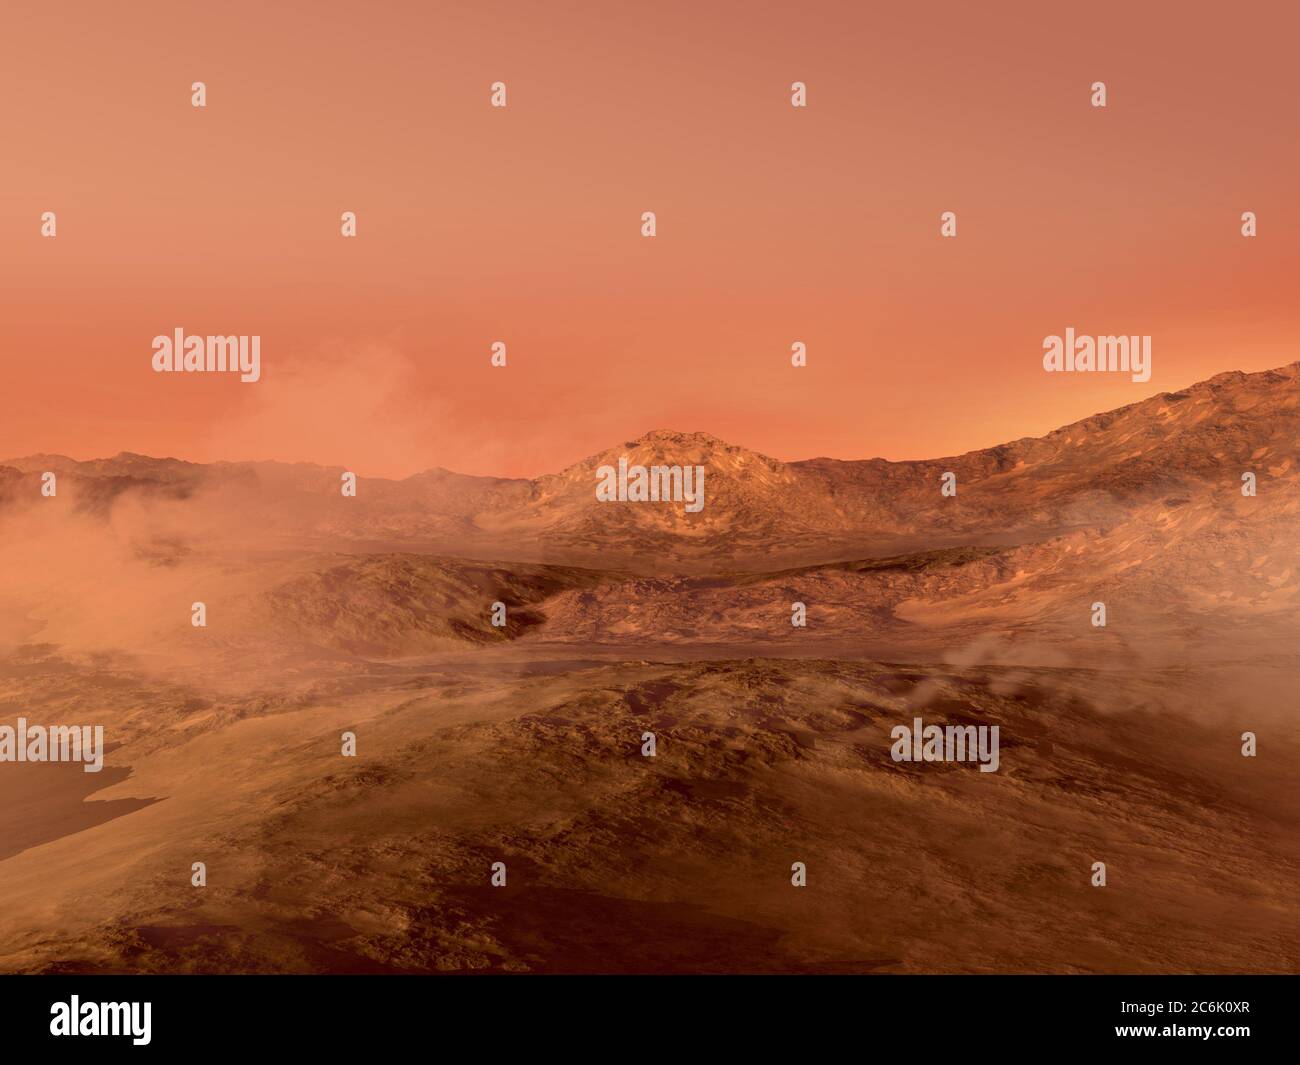 3D rendered Mars landscape with a red rocky terrain covered in fog, for science fiction or space exploration backgrounds. Stock Photo